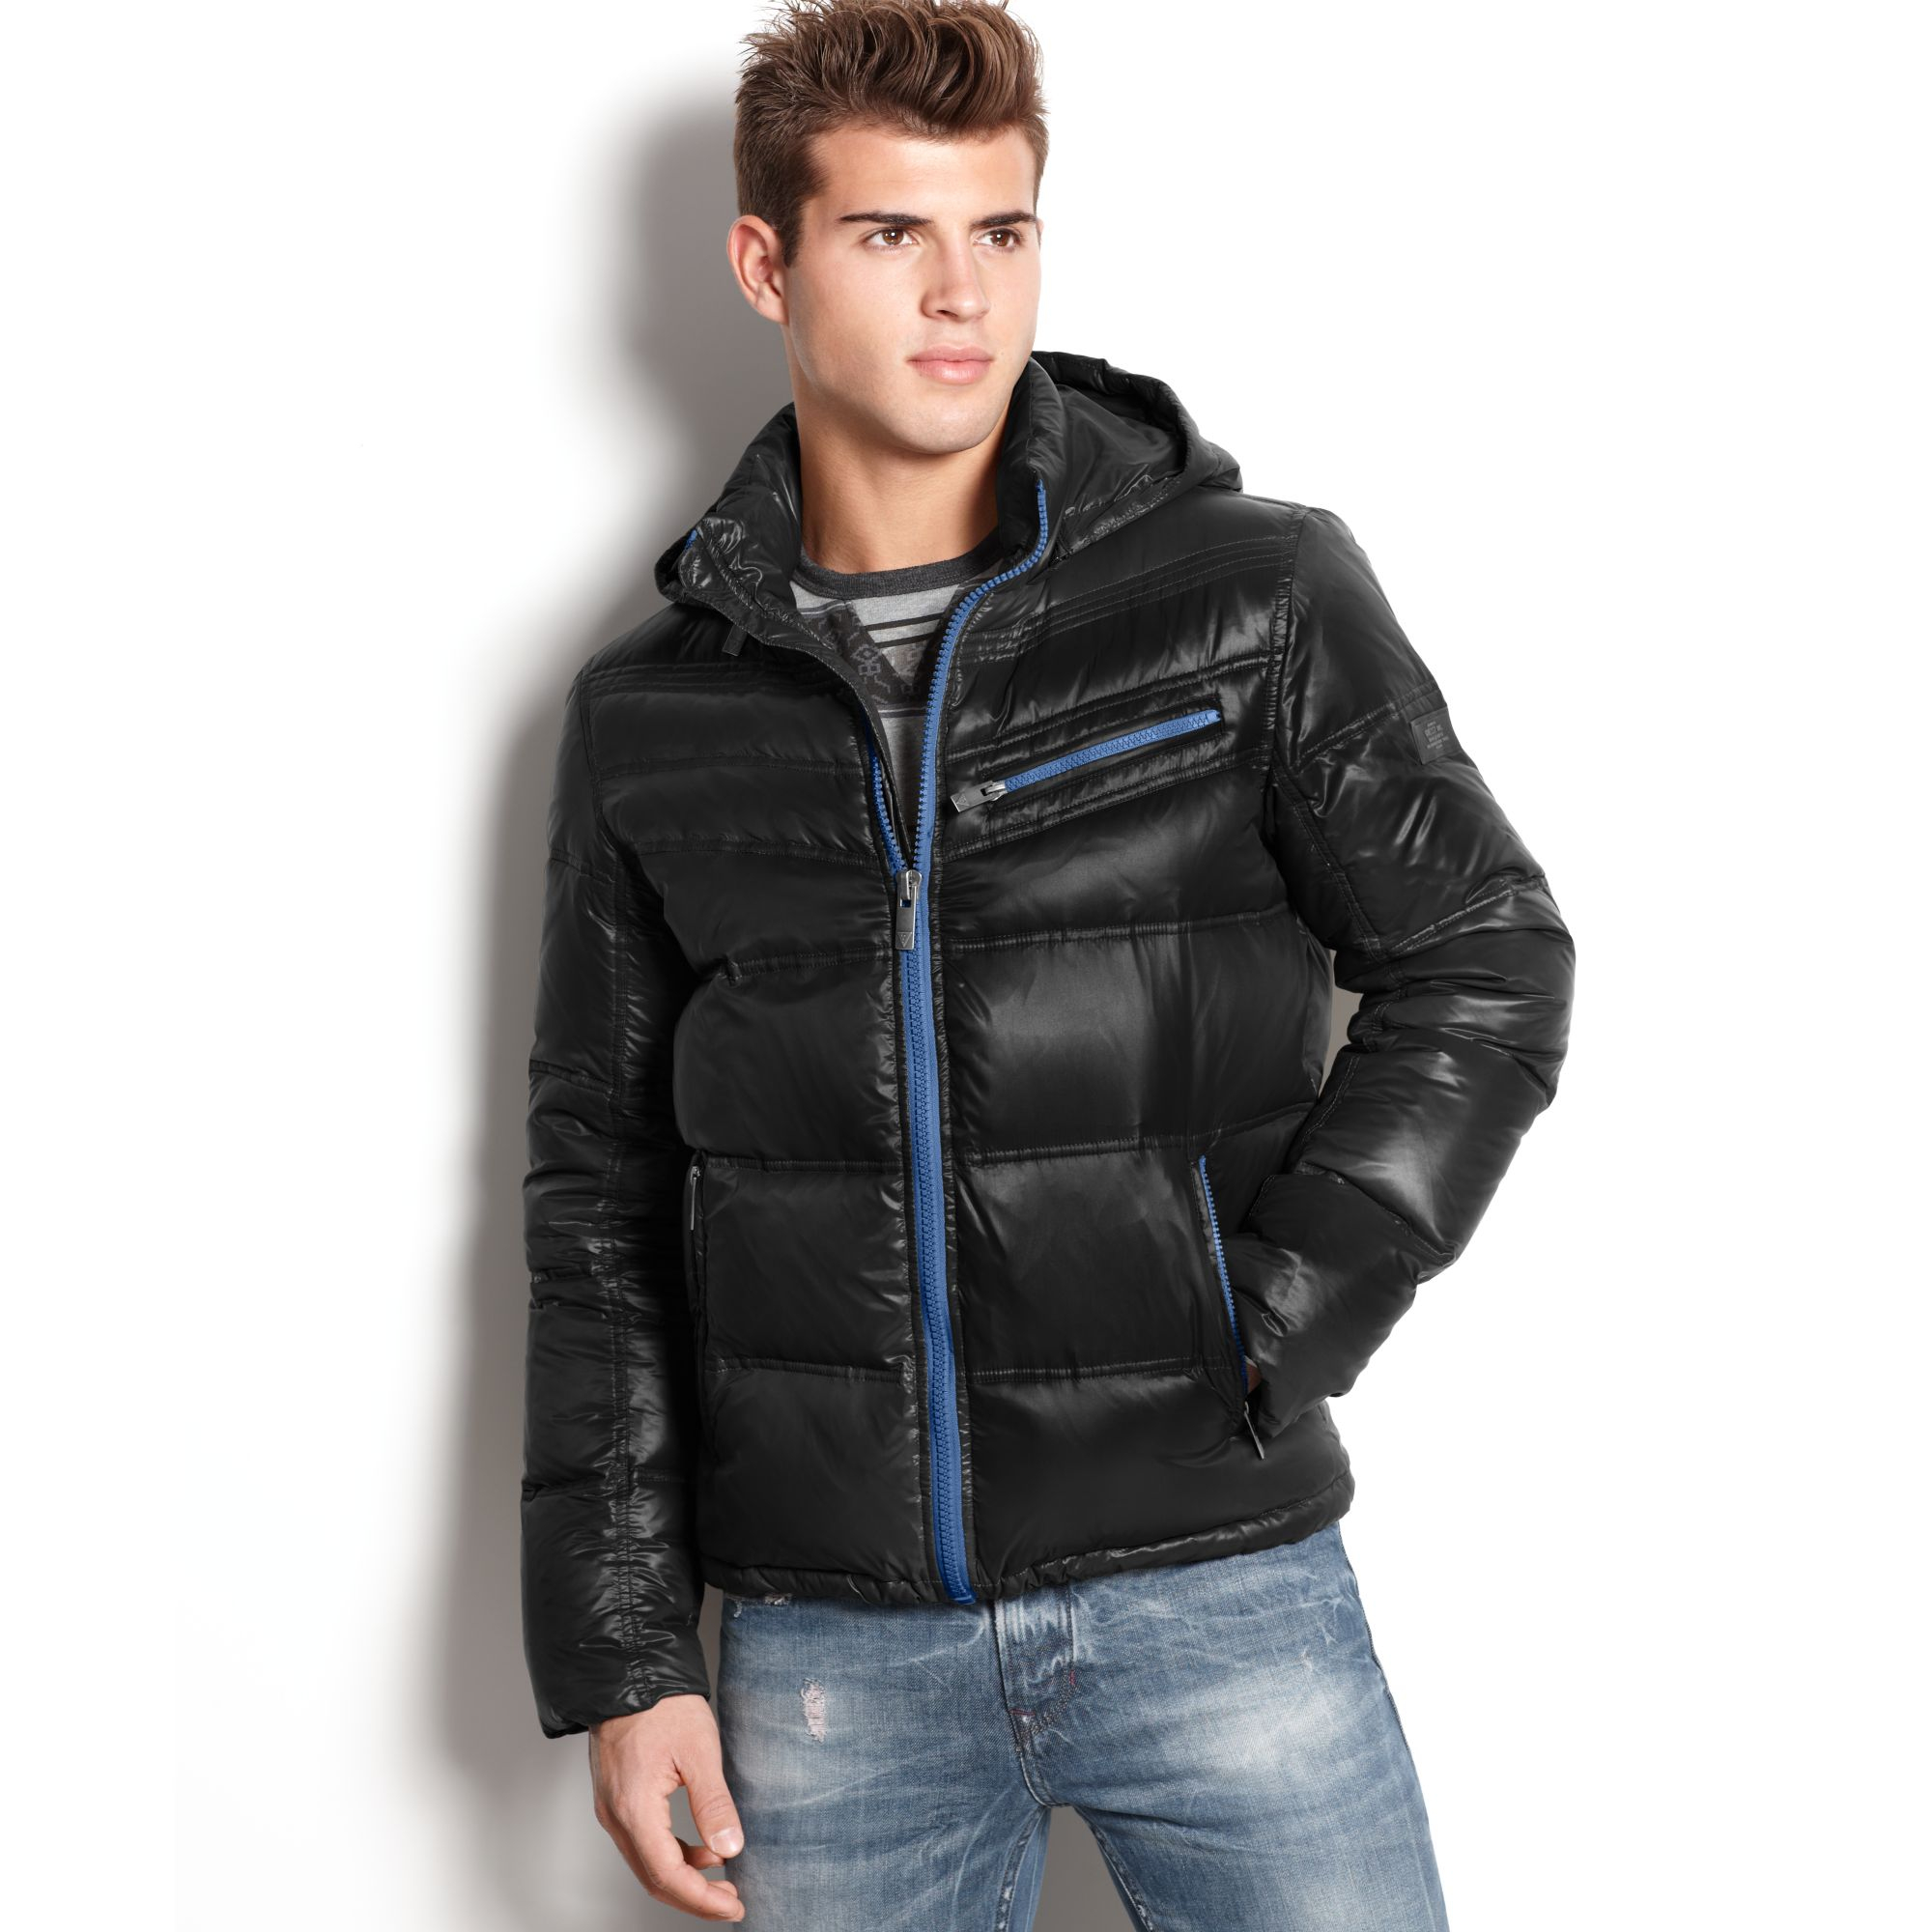 Lyst - Guess Jacket Chrome Hooded Quilted Puffer in Black for Men